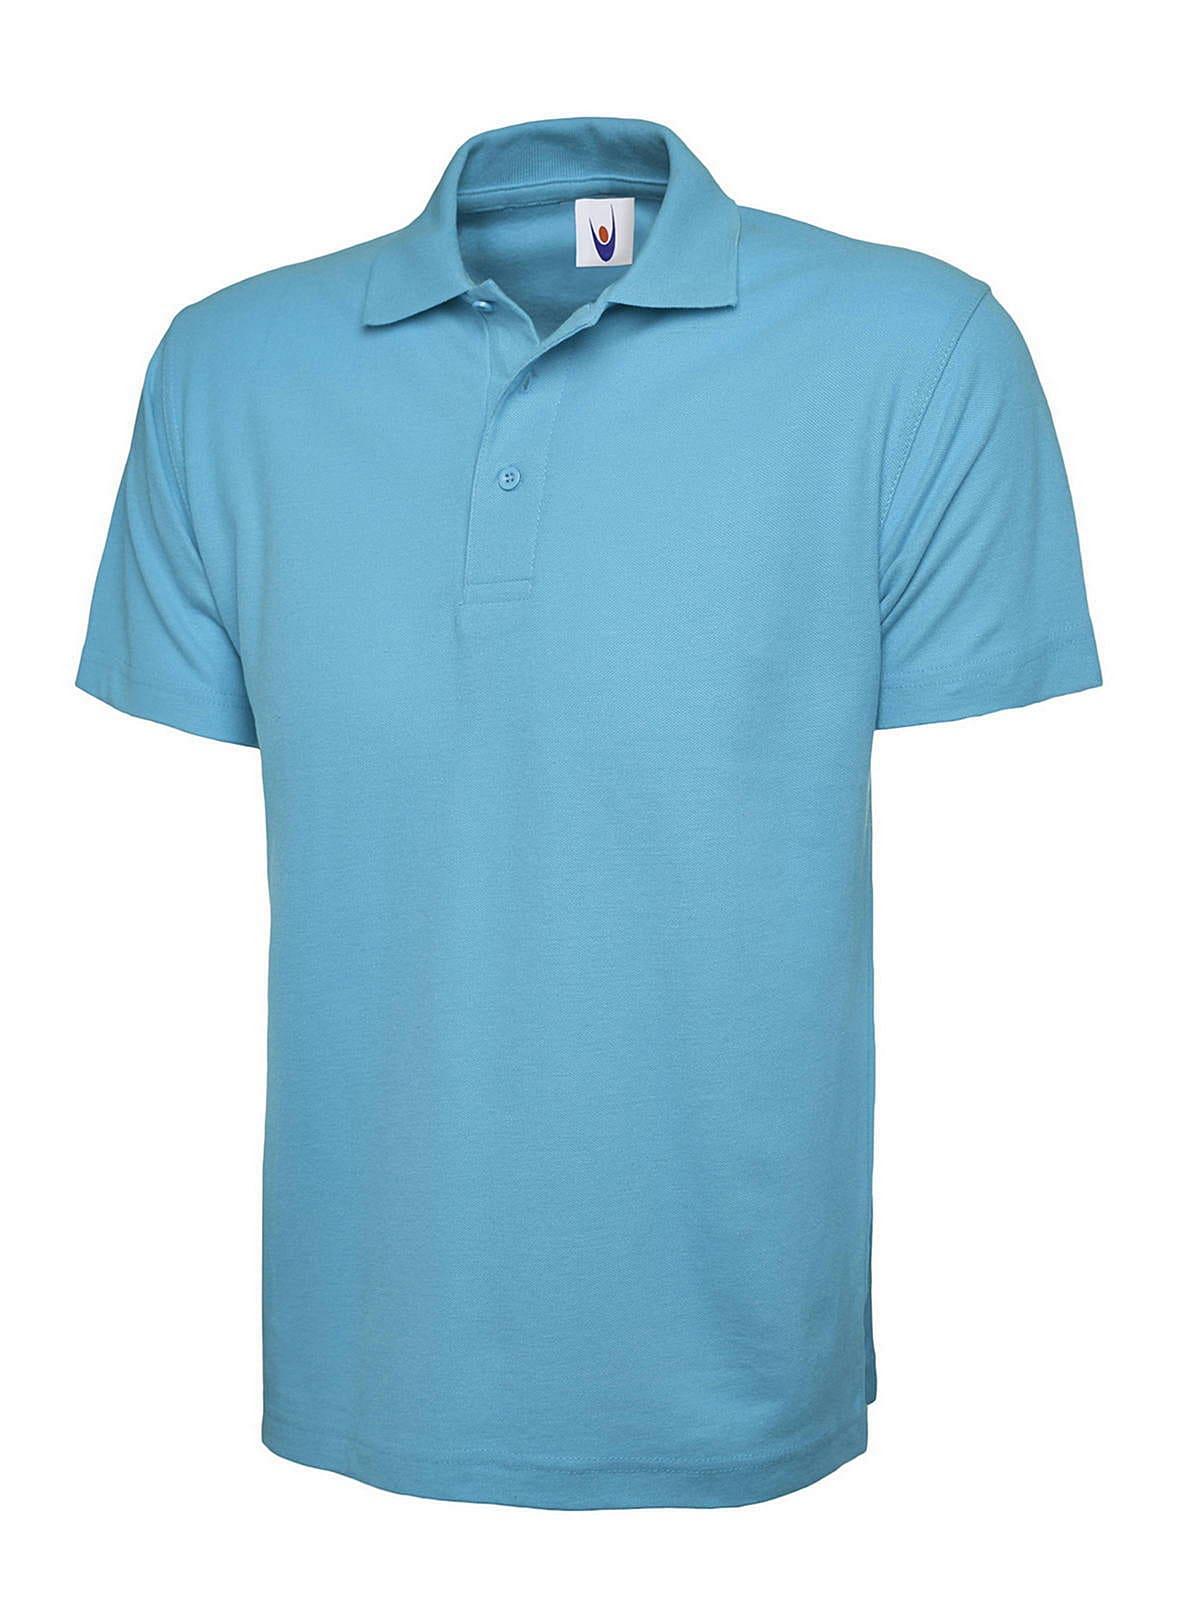 Uneek 220GSM Classic Polo Shirt in Sky (Product Code: UC101)